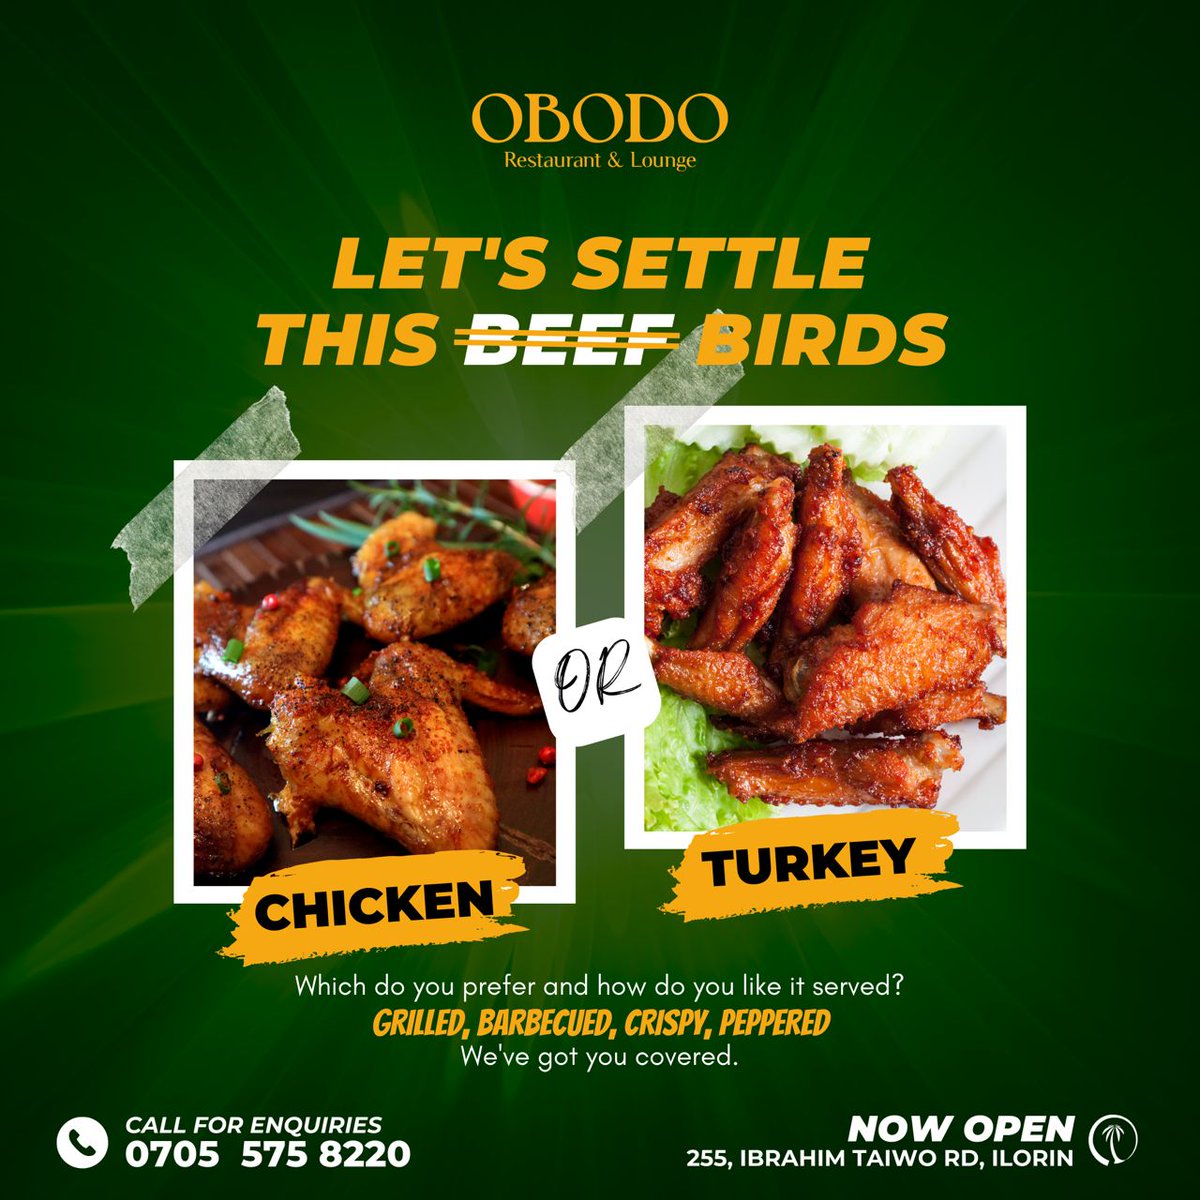 Oya, let’s settle this Rt for CHICKEN Like for TURKEY??? Tag 2 foodies to vote too 😋😋 ➖➖➖➖➖➖➖➖ Our hours of operation: Restaurant : 11AM-10PM OpenLounge : 11AM-12AM Sundays: 2PM Call for enquiries: 07055758220 #ilorin #obodorestaurantandlounge